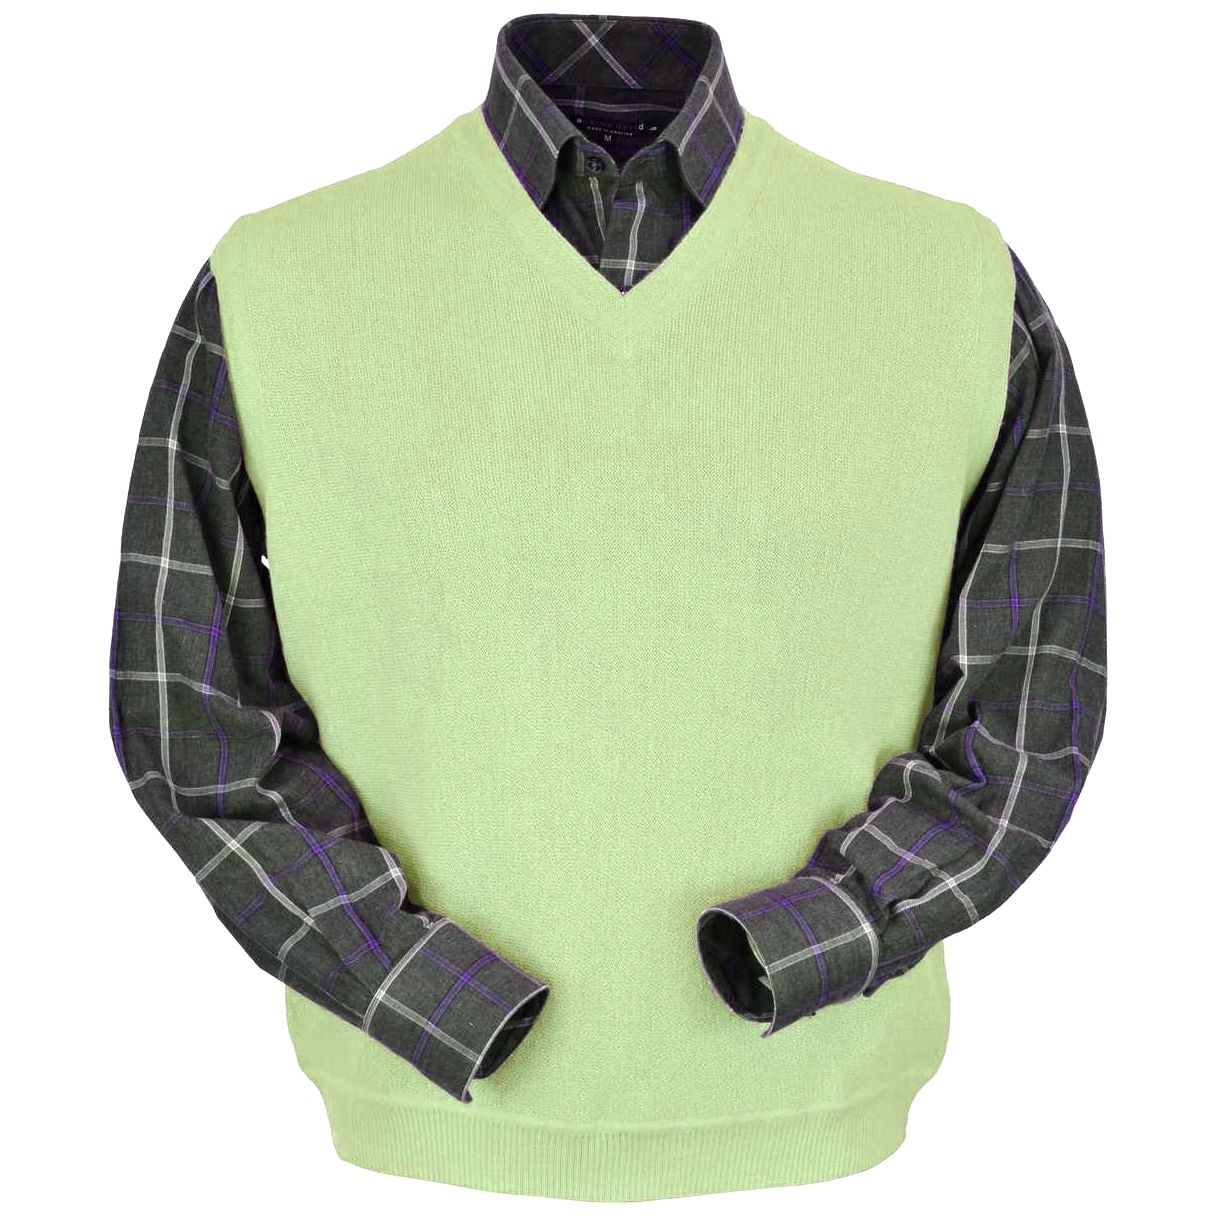 Baby Alpaca 'Links Stitch' V-Neck Sweater Vest in Lime by Peru Unlimited